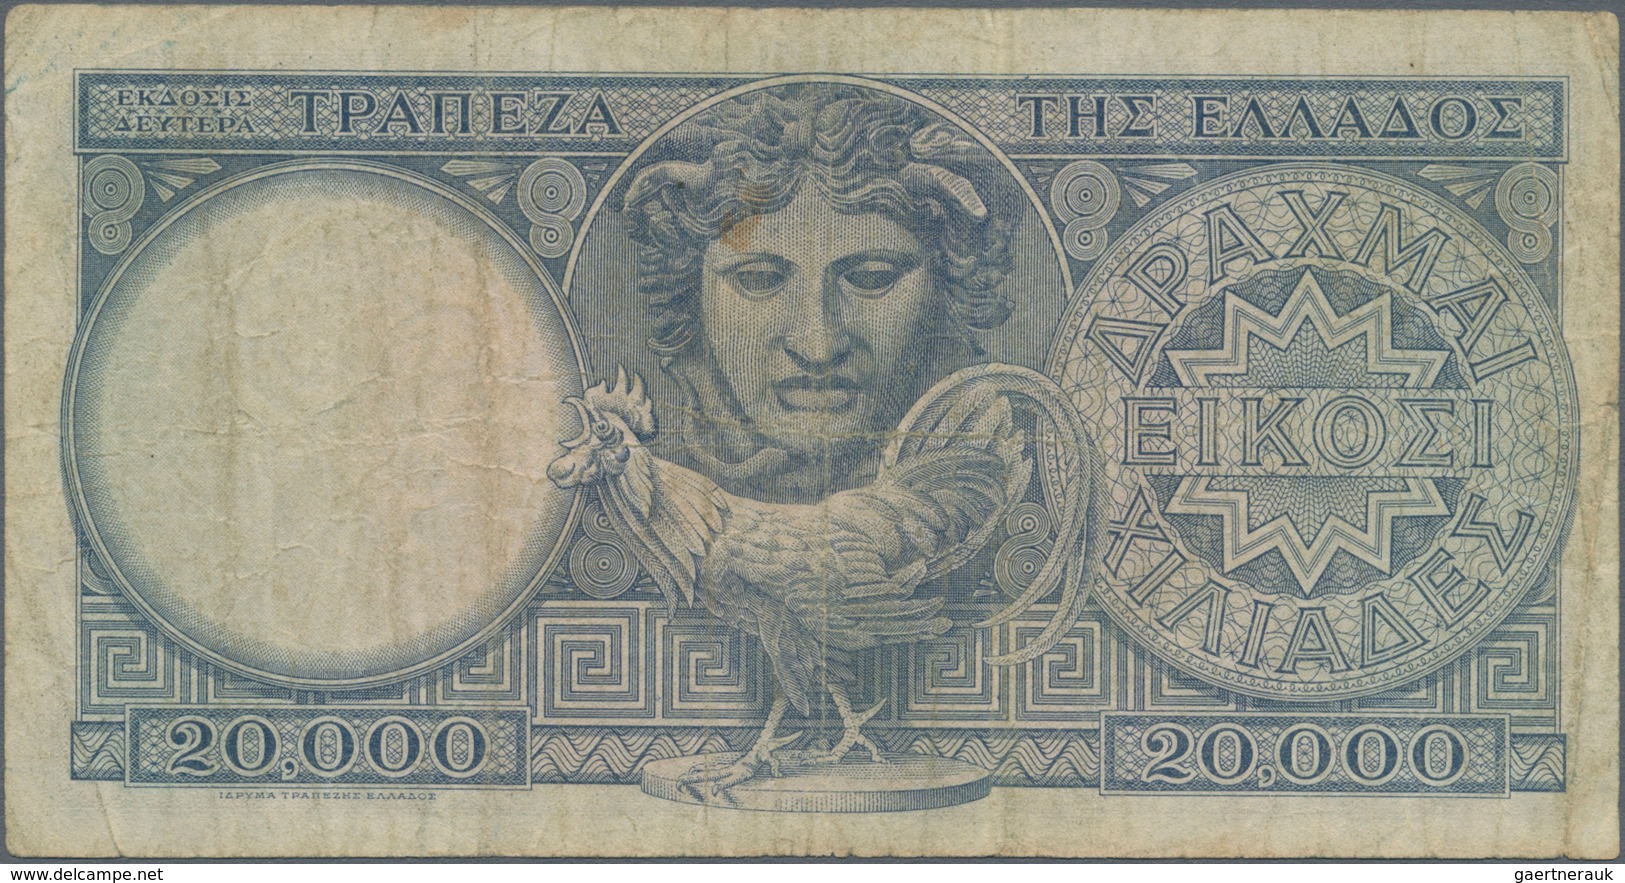 Greece / Griechenland: Set With 4 Banknotes Comprising 1000 Drachmai ND(1944) P.172 (XF), 20.000 Dra - Griechenland